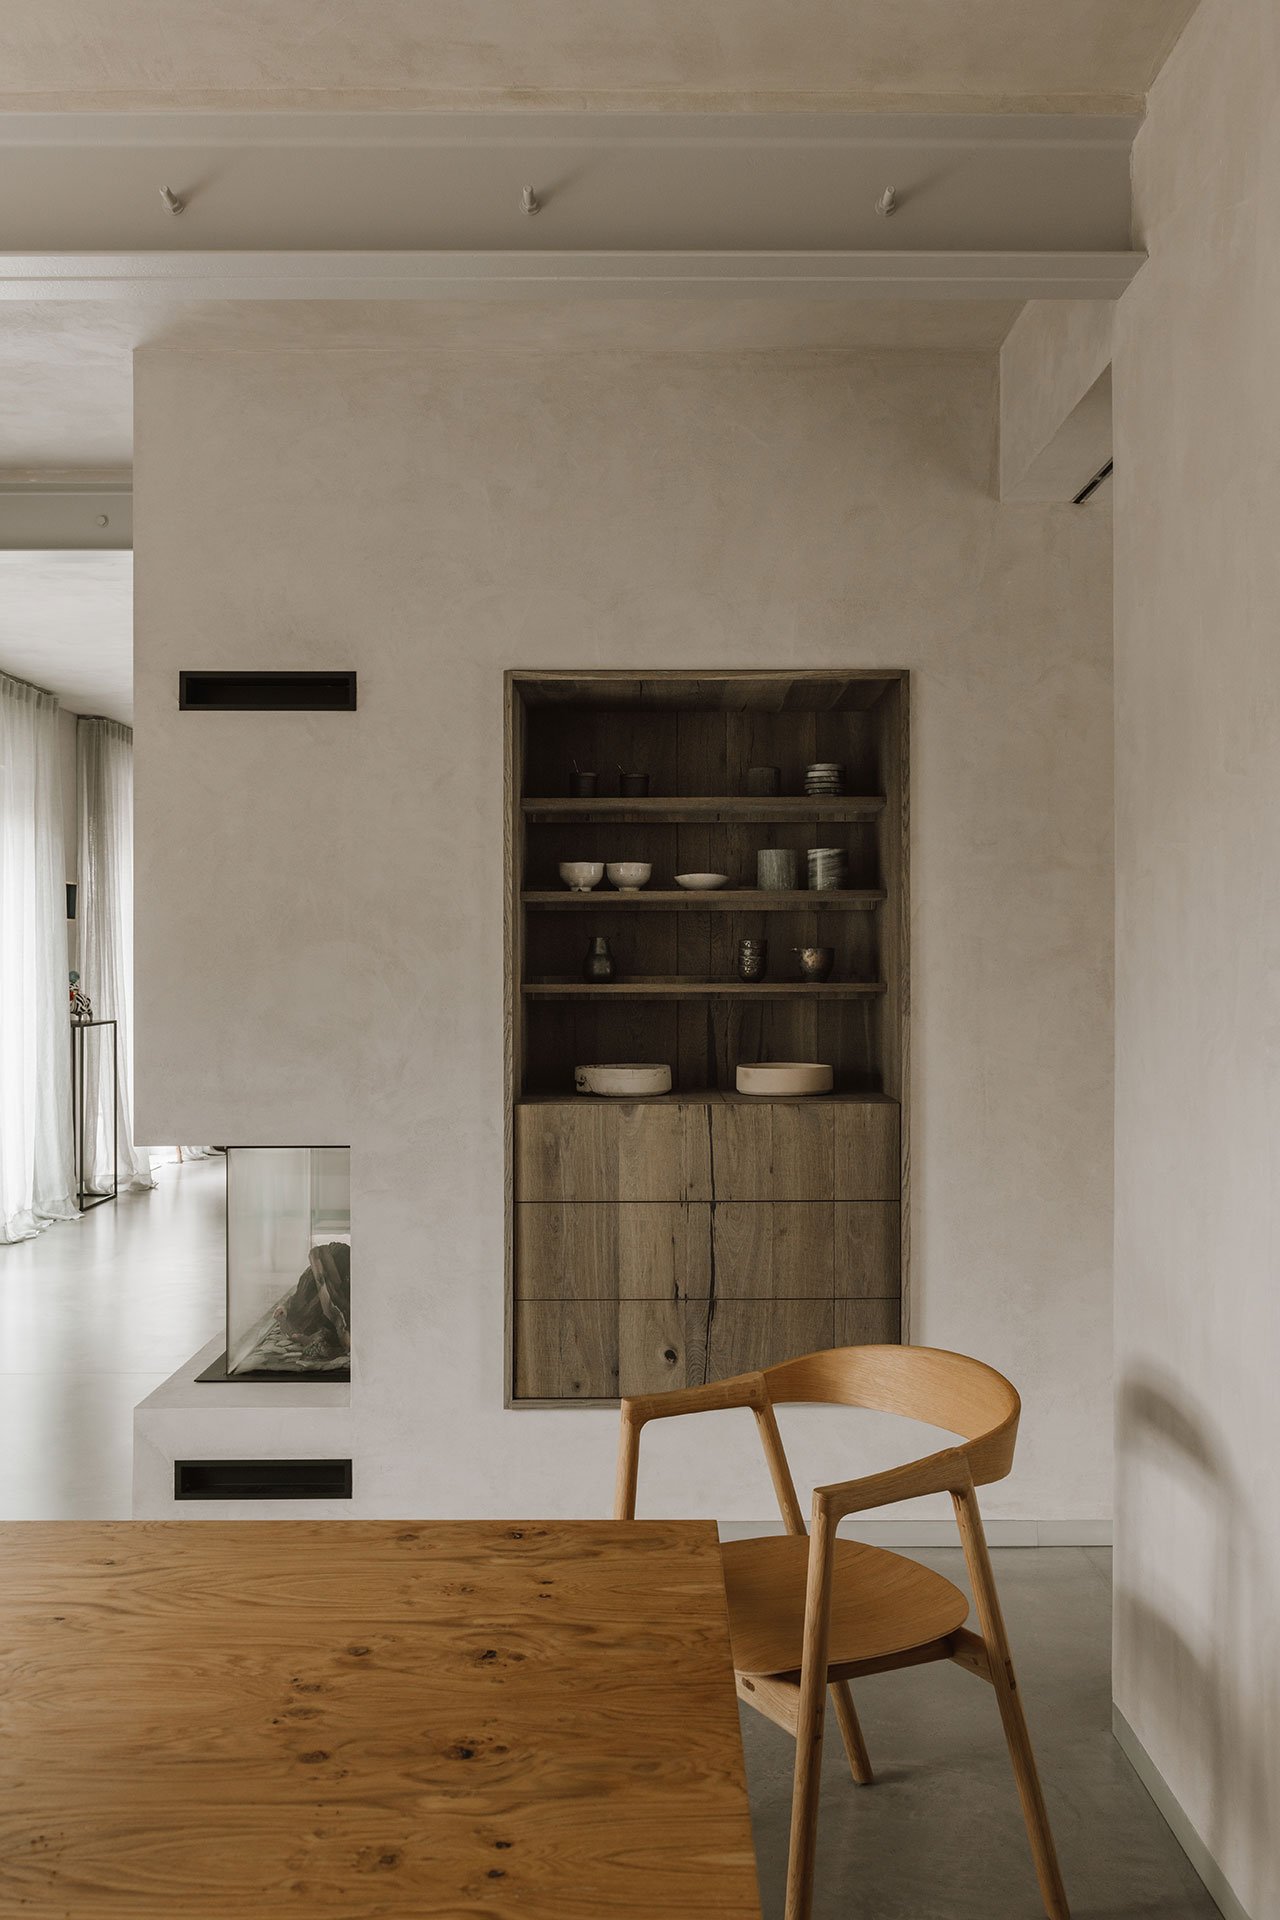 House in Krakow with minimalist soulfulness